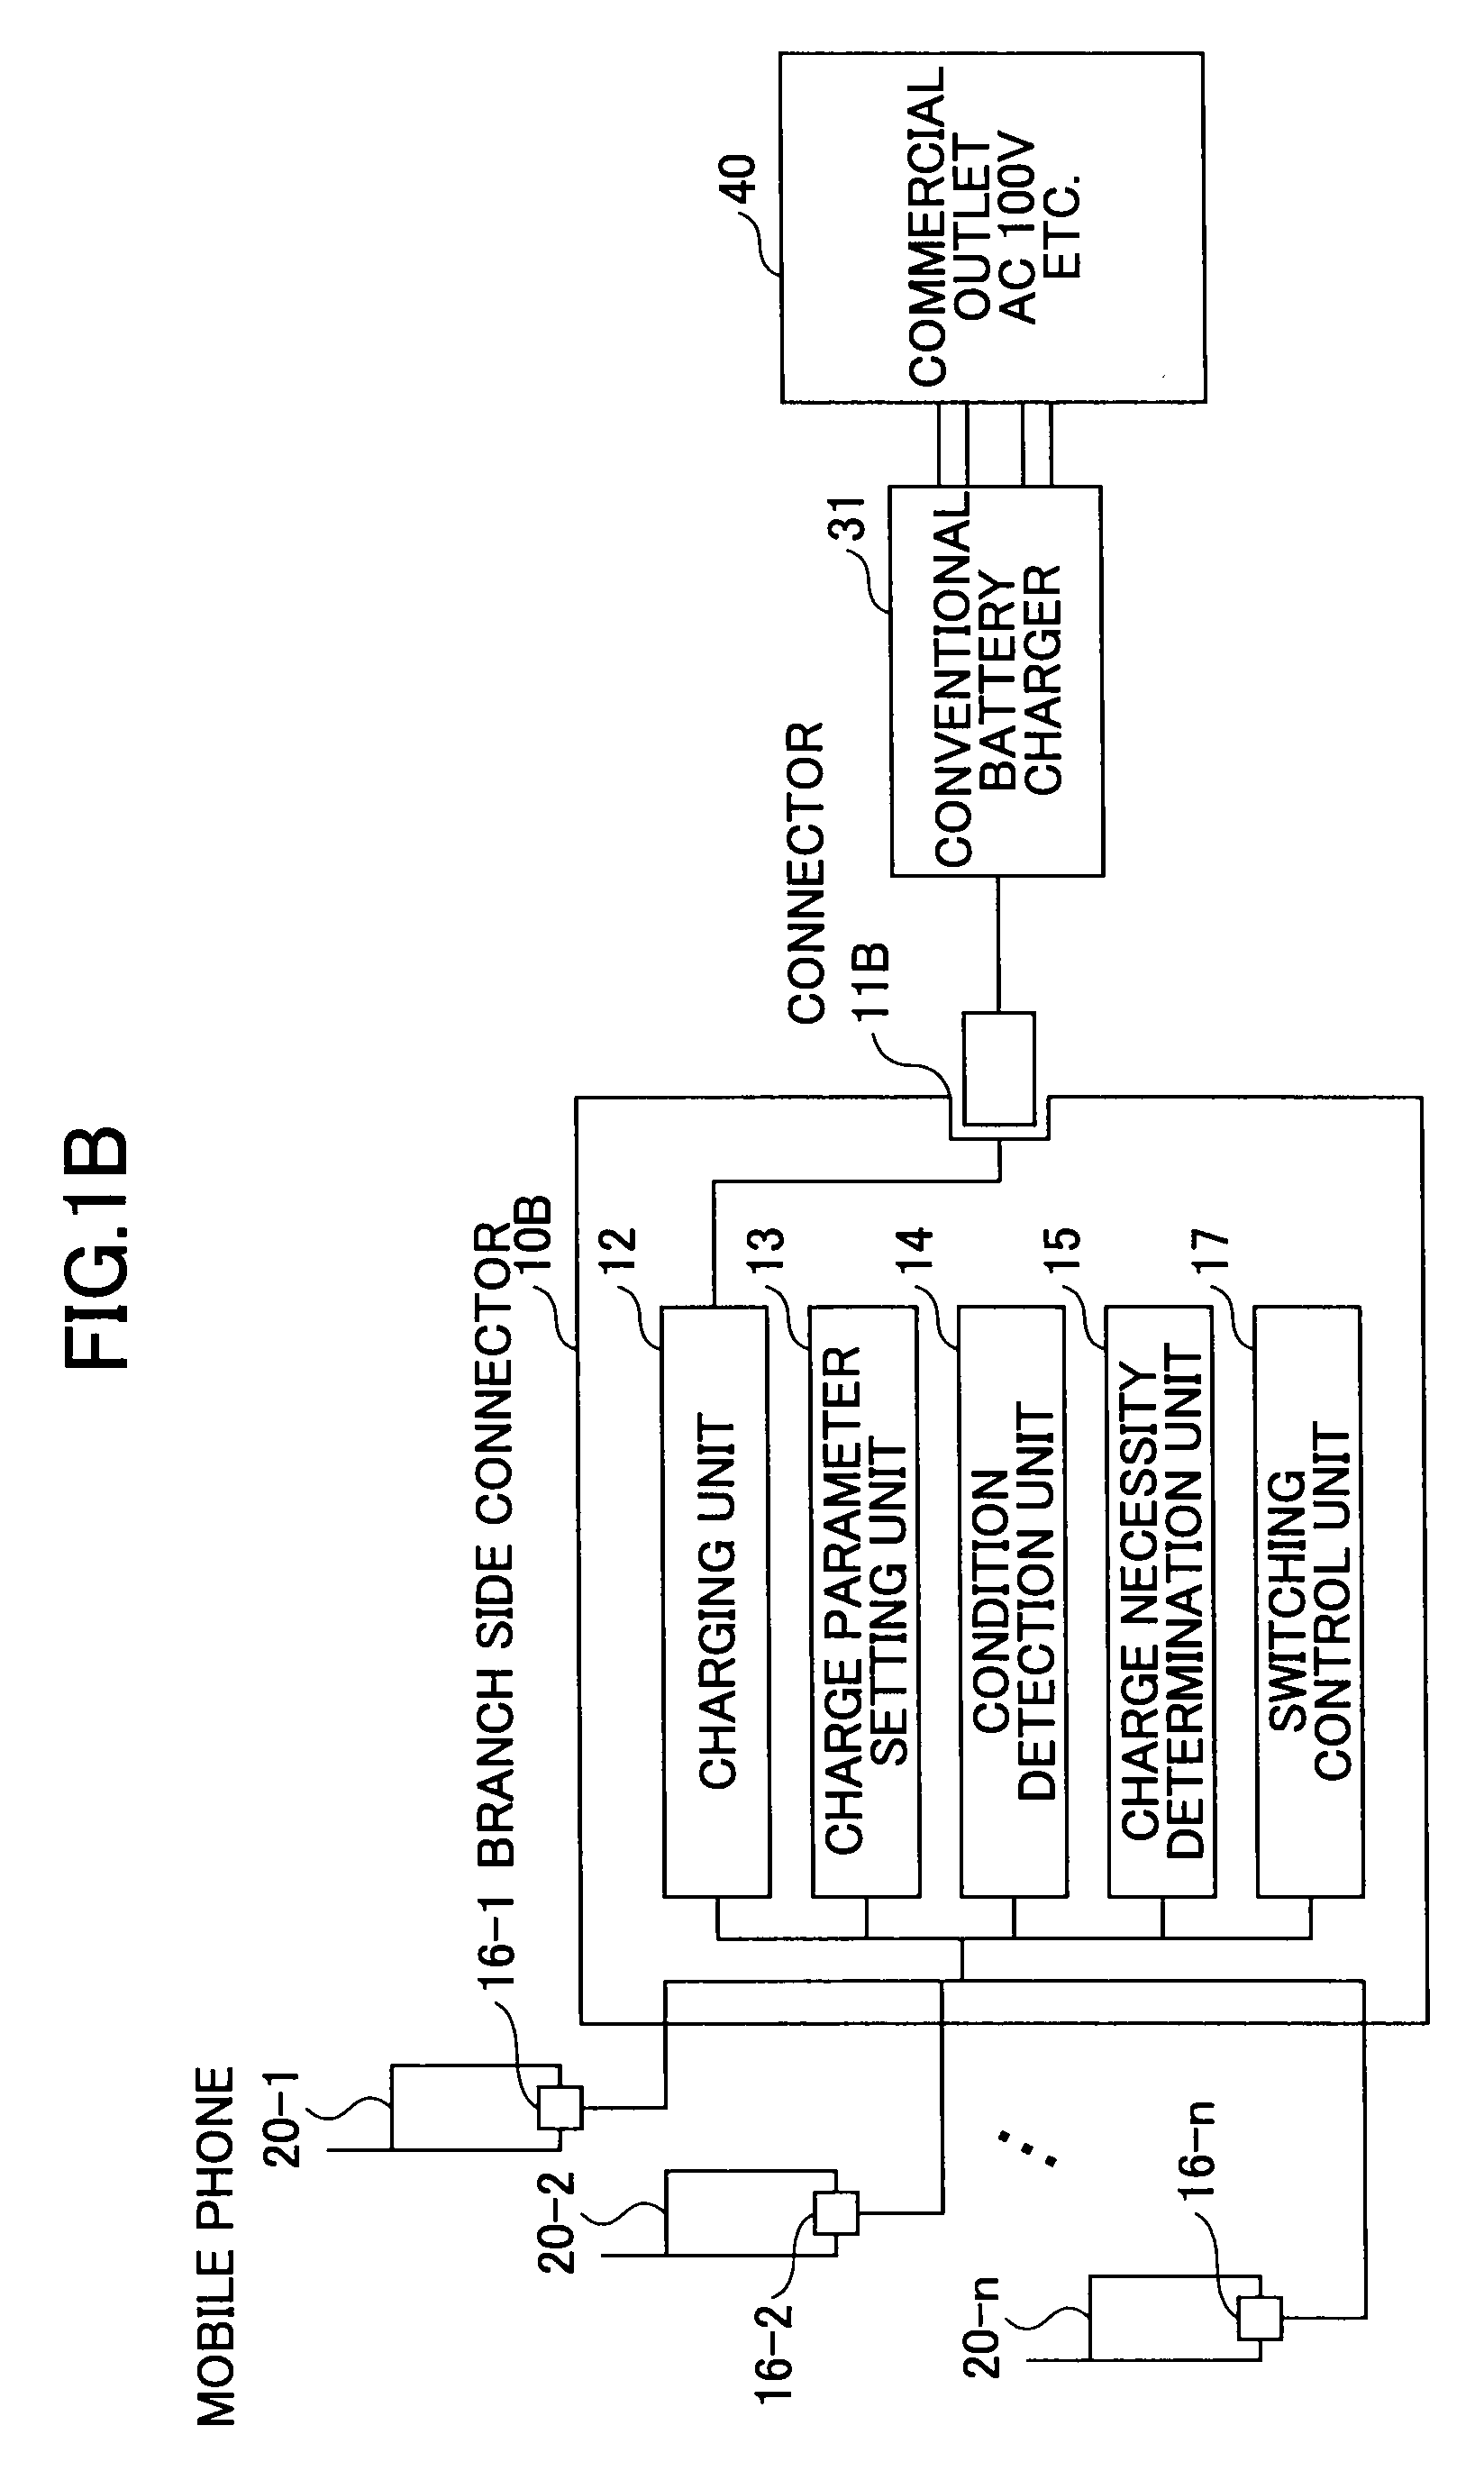 Battery charger for multiple mobile devices